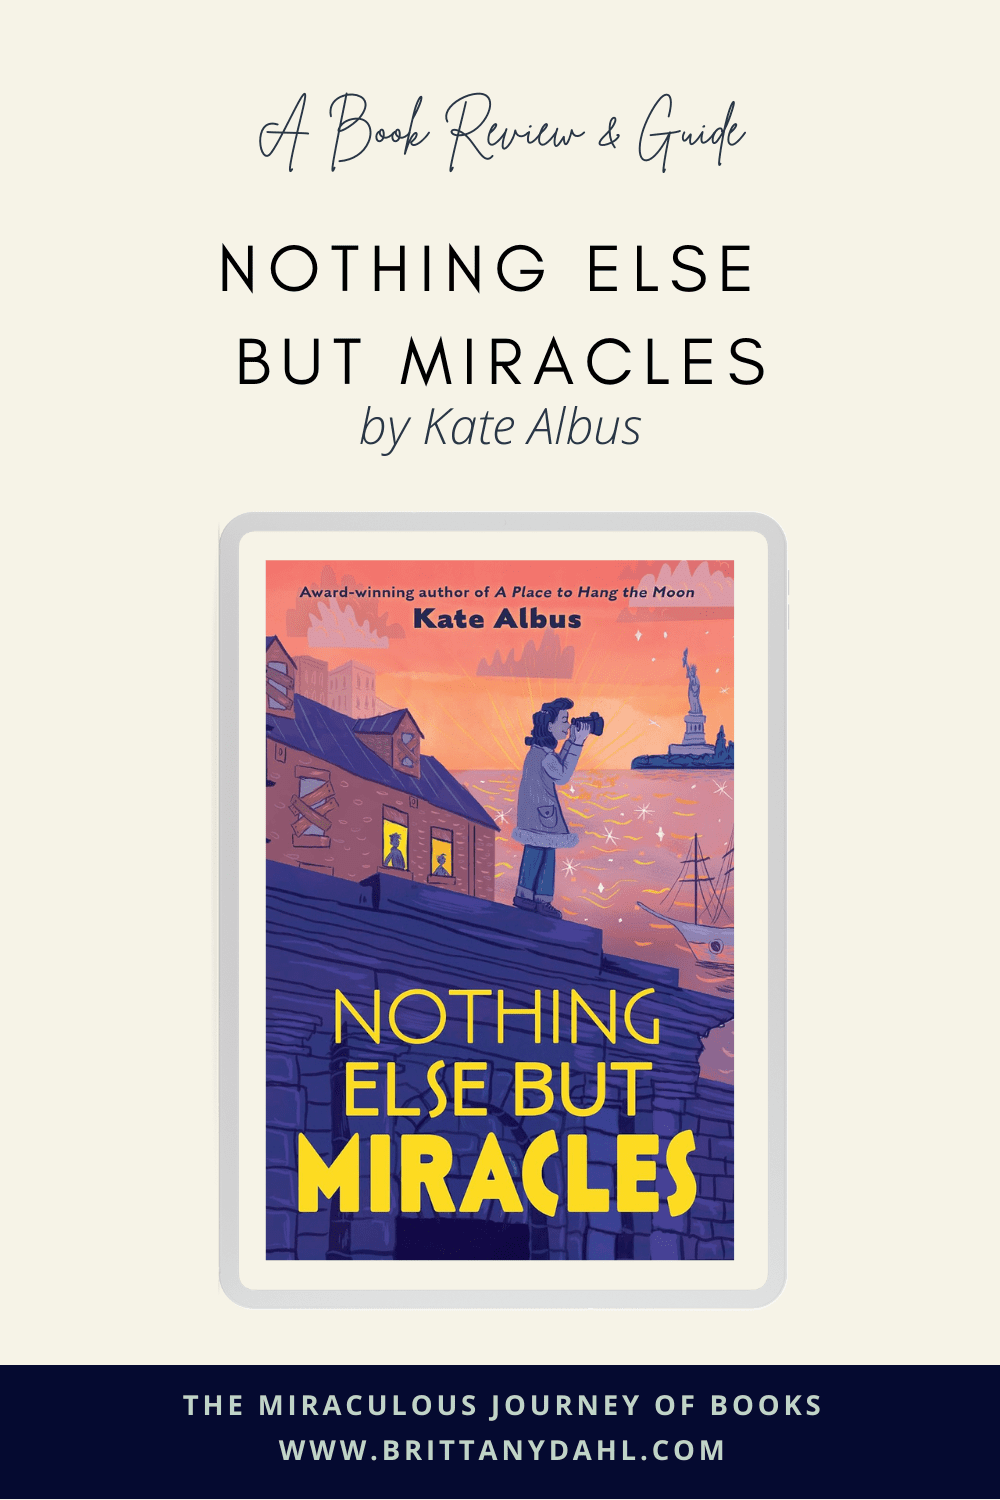 Nothing Else But Miracles by Kate Albus: A Book Review & Reading Guide